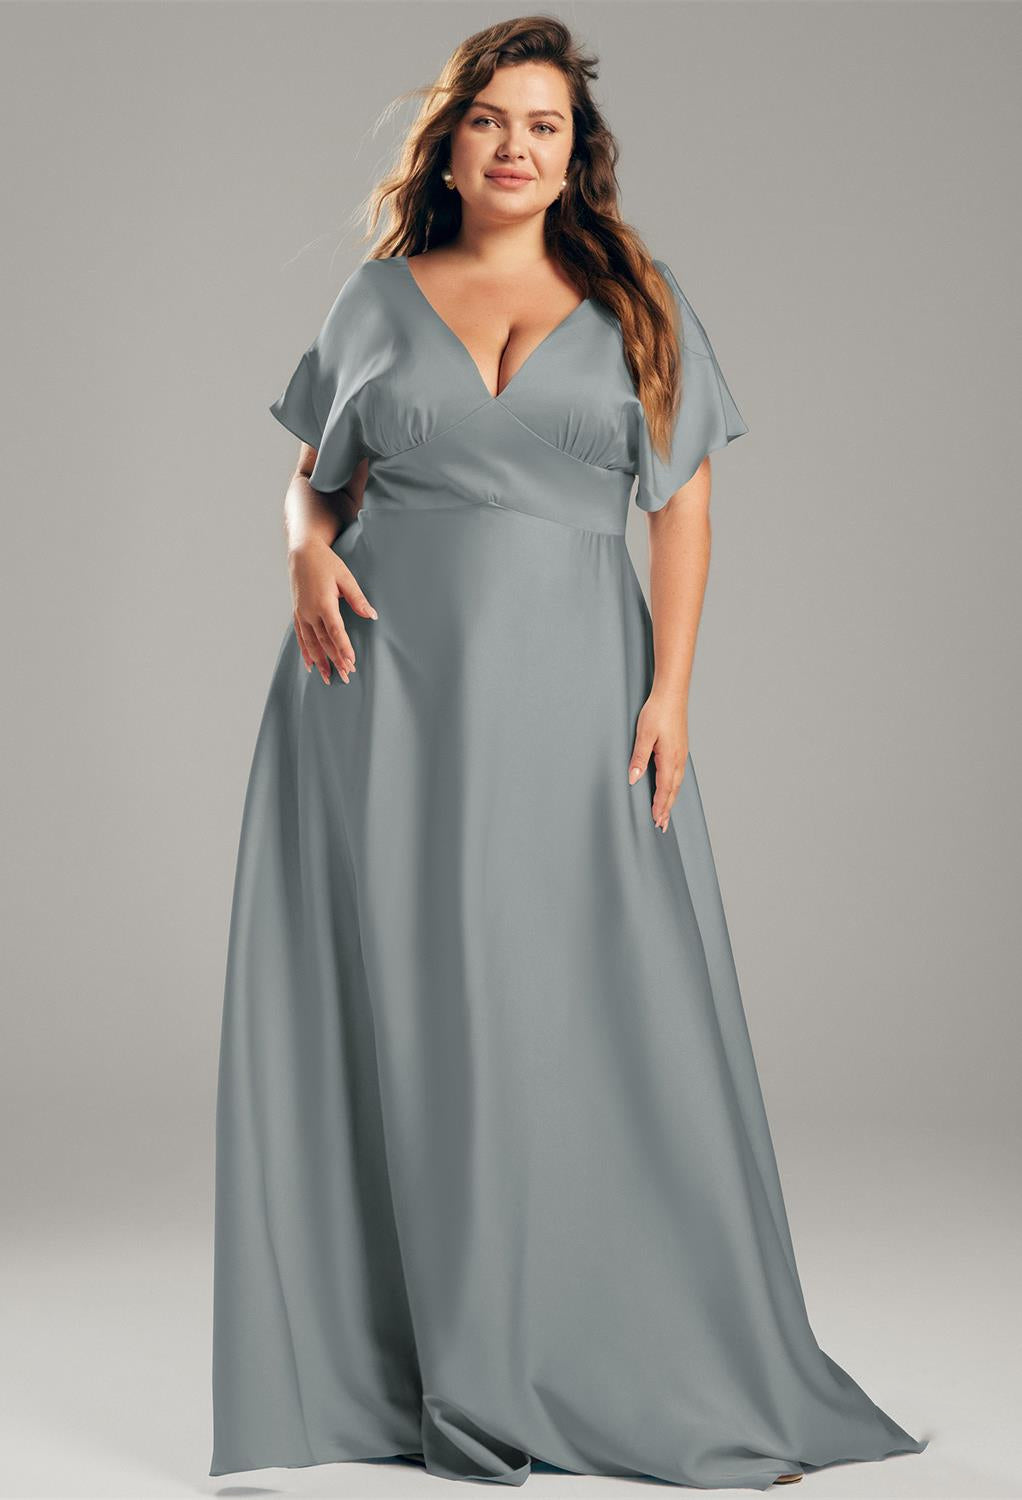 Nora - Satin Charmeuse Bridesmaid Dress - Off The Rack by Bergamot Bridal is available at bridal shops in London.